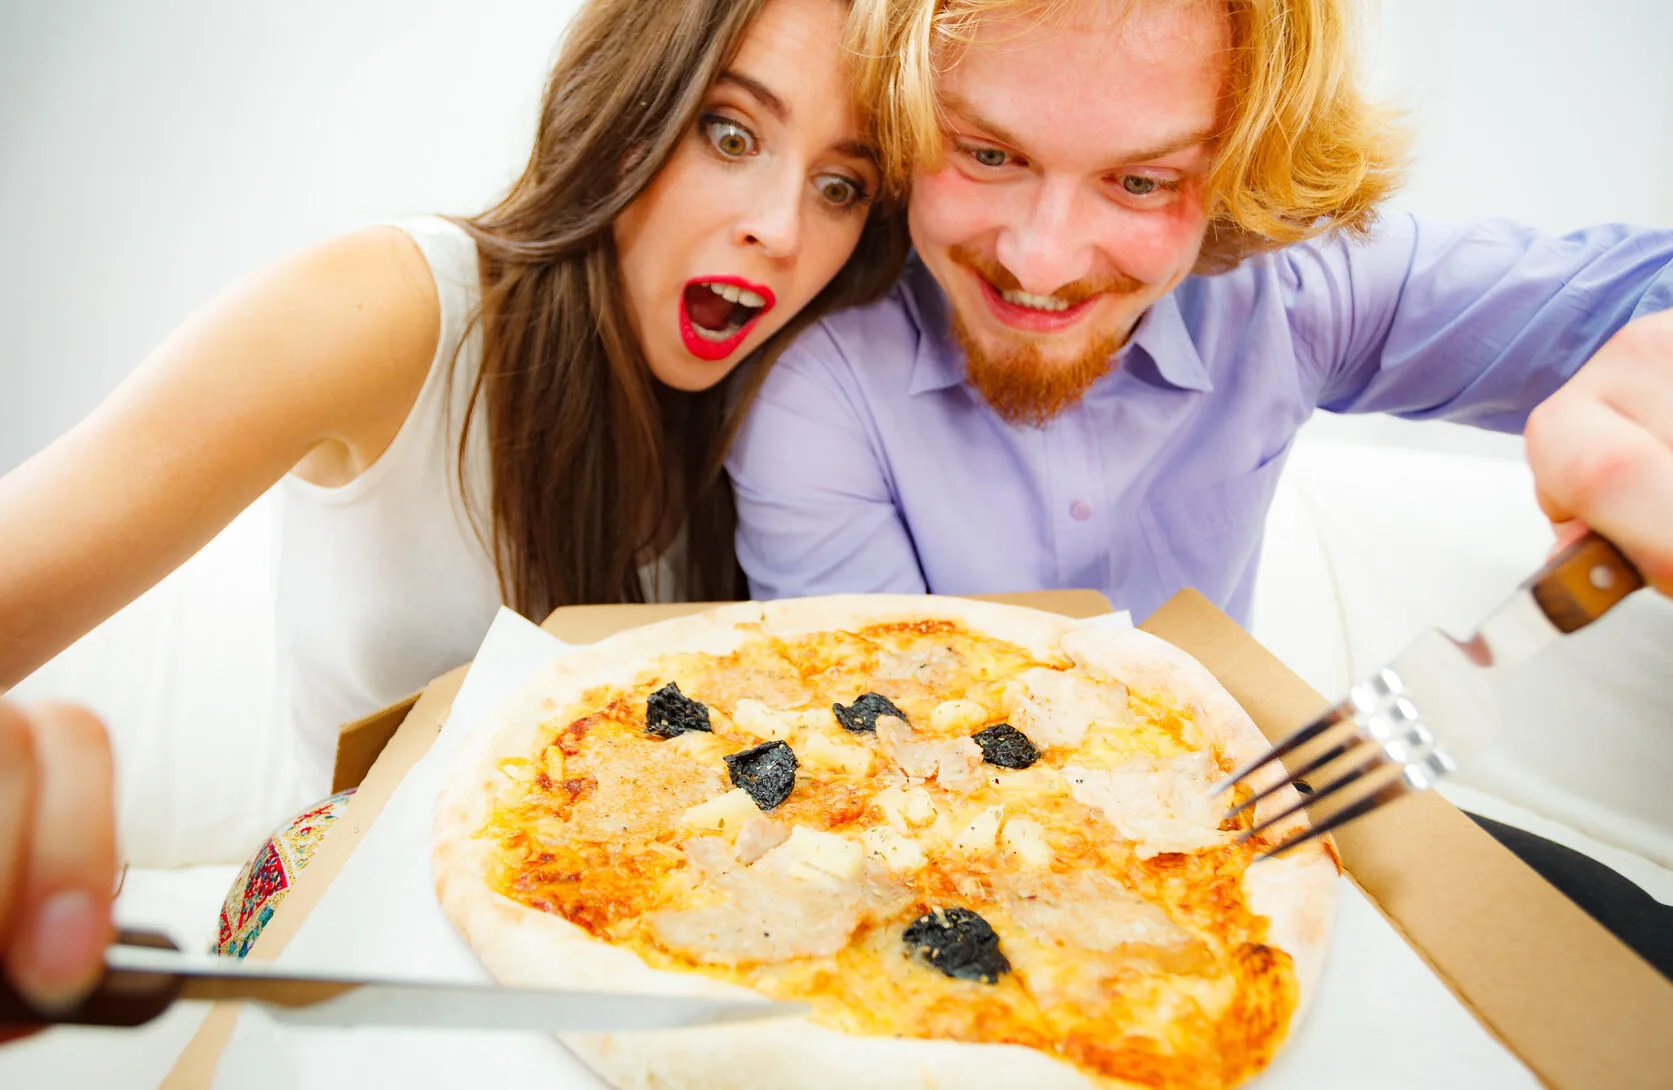 Funny crazy man and woman spending time together. Cheerful couple or friends eating delicious cheesy pizza.